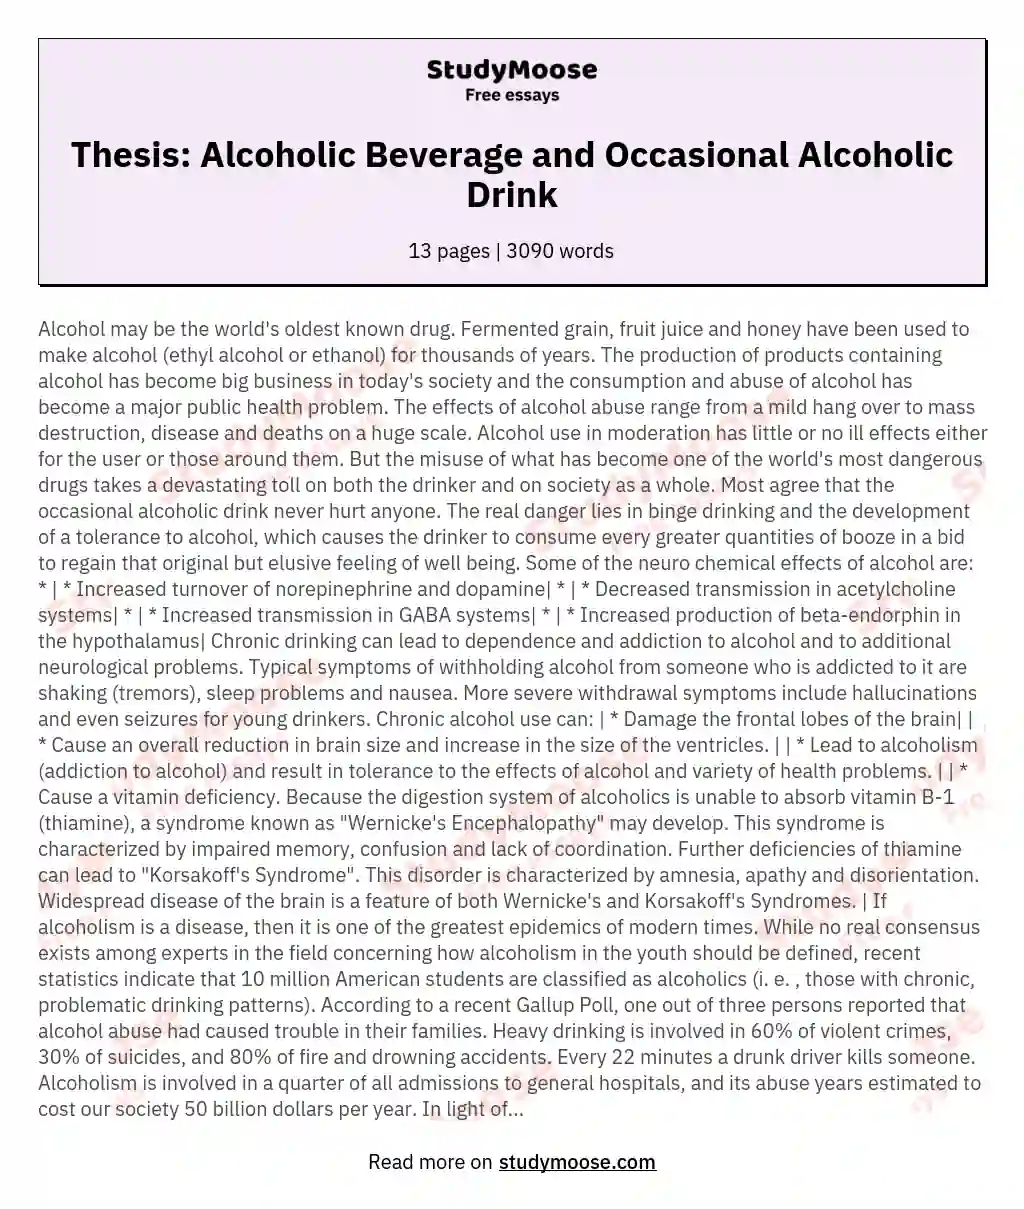 Thesis: Alcoholic Beverage and Occasional Alcoholic Drink essay